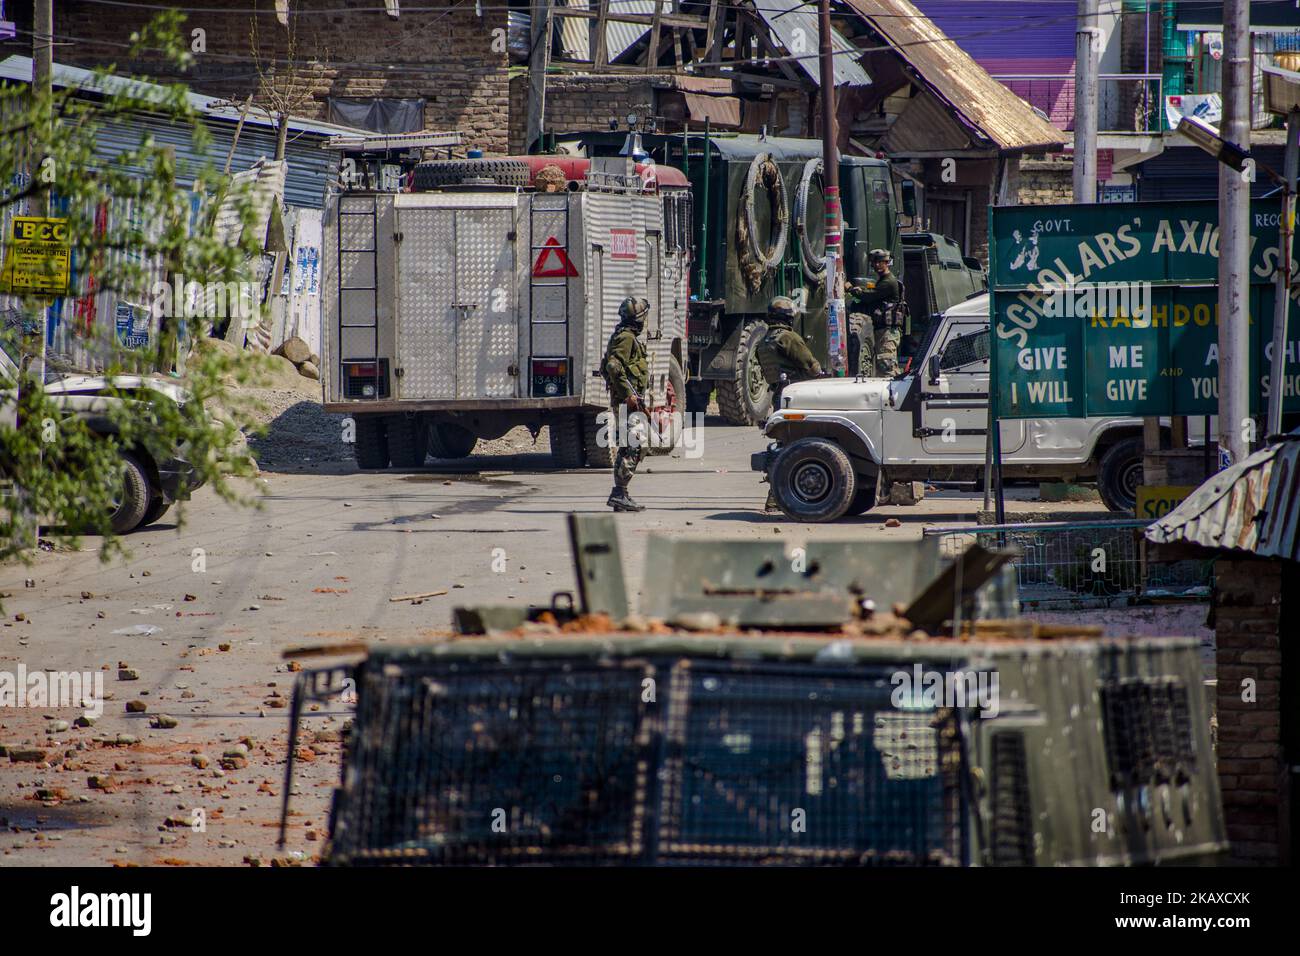 Indian military forces stand alert near the site during a gun battle between Indian armed forces and rebels on April 1, 2018 in Shopain south of Srinagar, the summer capital of Indian administered Kashmir, India. Indian forces shot dead 13 militants in separate gunfights in the Shopian and Anantnag districts of Indian-administered Kashmir, a police officer said. Three Indian military forces and four Kashmiri Muslim civilian were also killed and 50 others were wounded as local residents clashed with Indian forces, the officer said. The news of the militants' killings triggered civilian protests Stock Photo